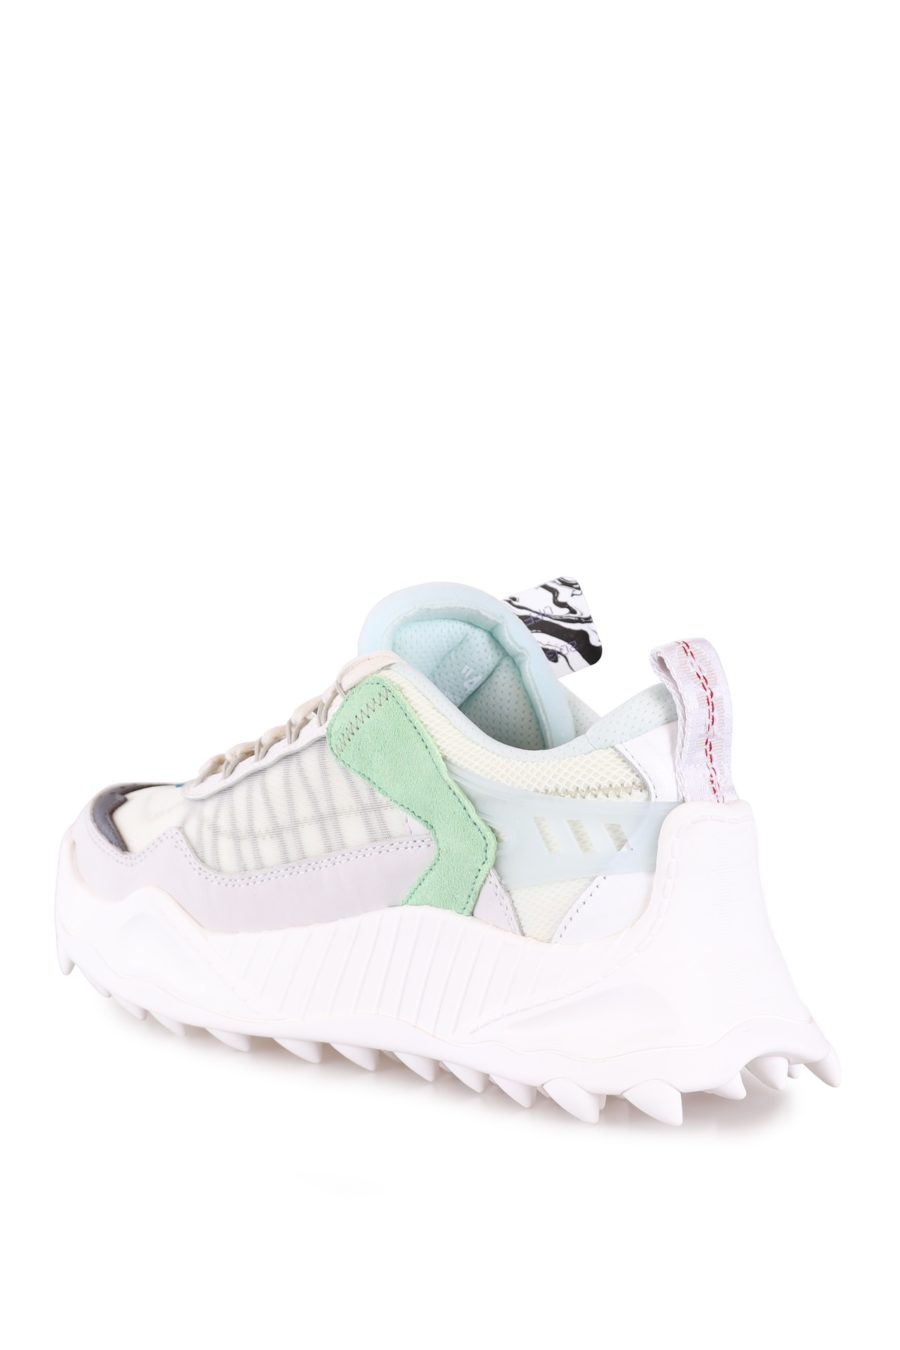 Trainers Off-White "ODSY-1000" white with blue arrows - 9458b599e102a7bb46934613bc59915aec03afe3